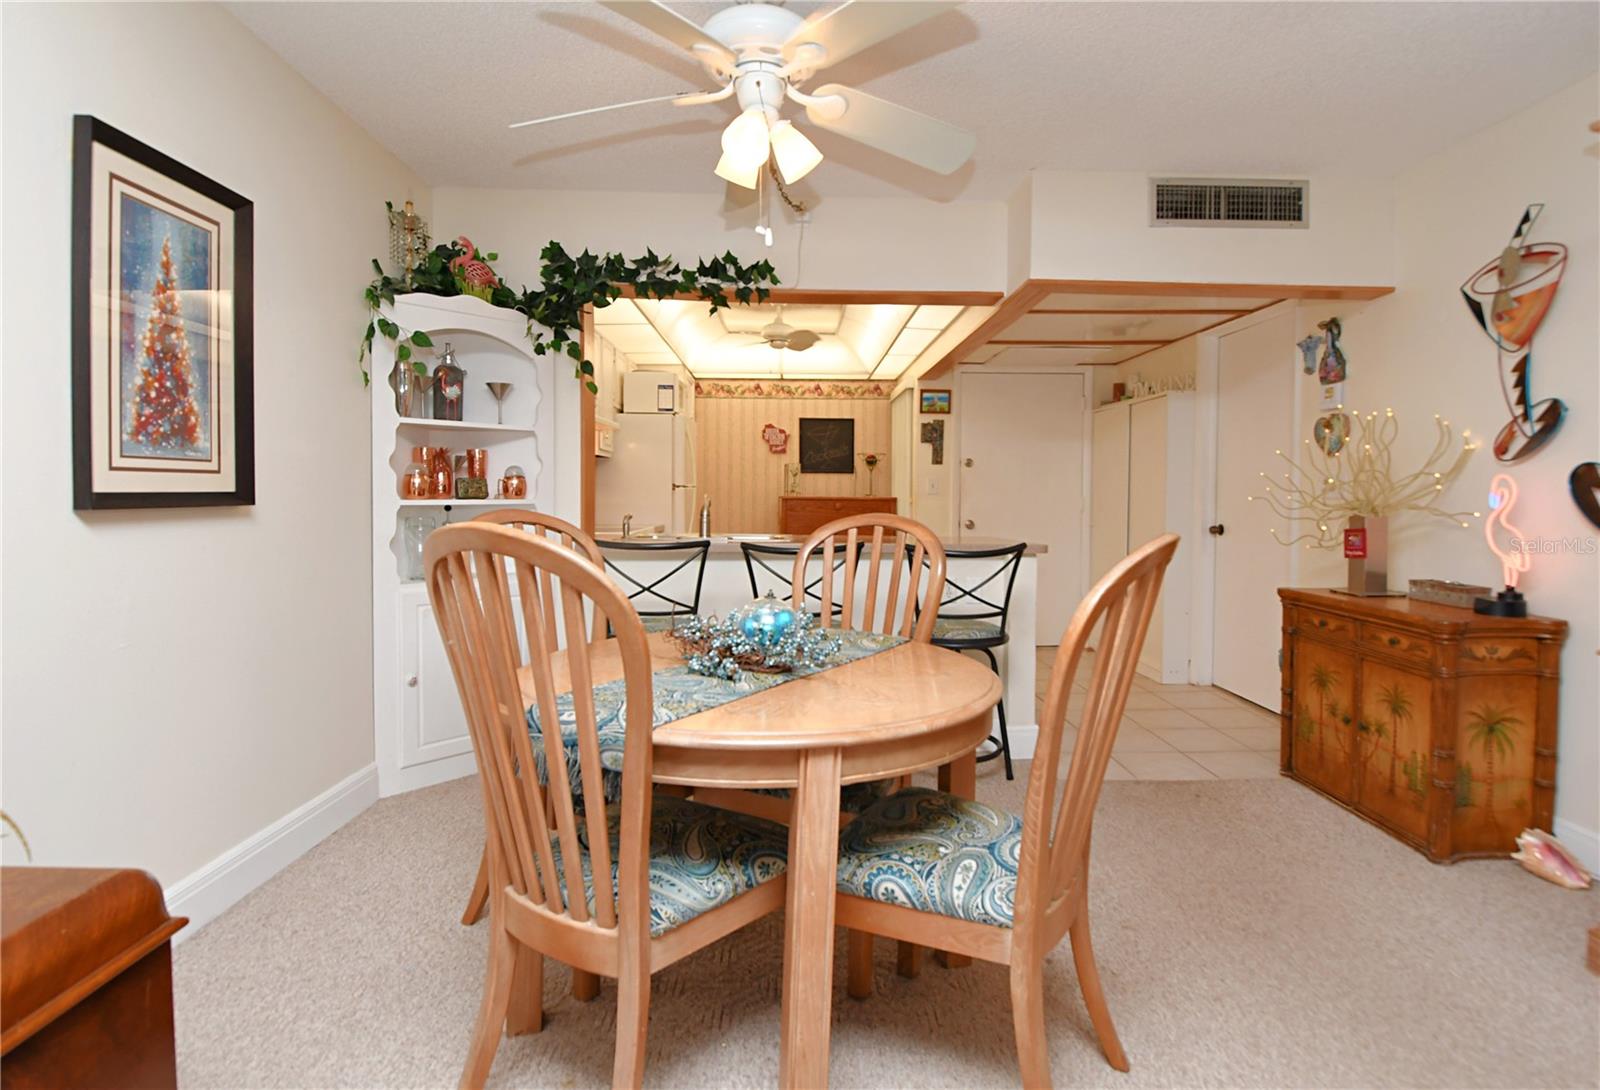 The dining room, featuring a carpeted floor and a ceiling fan, provides a comfortable and inviting space for entertaining guests.